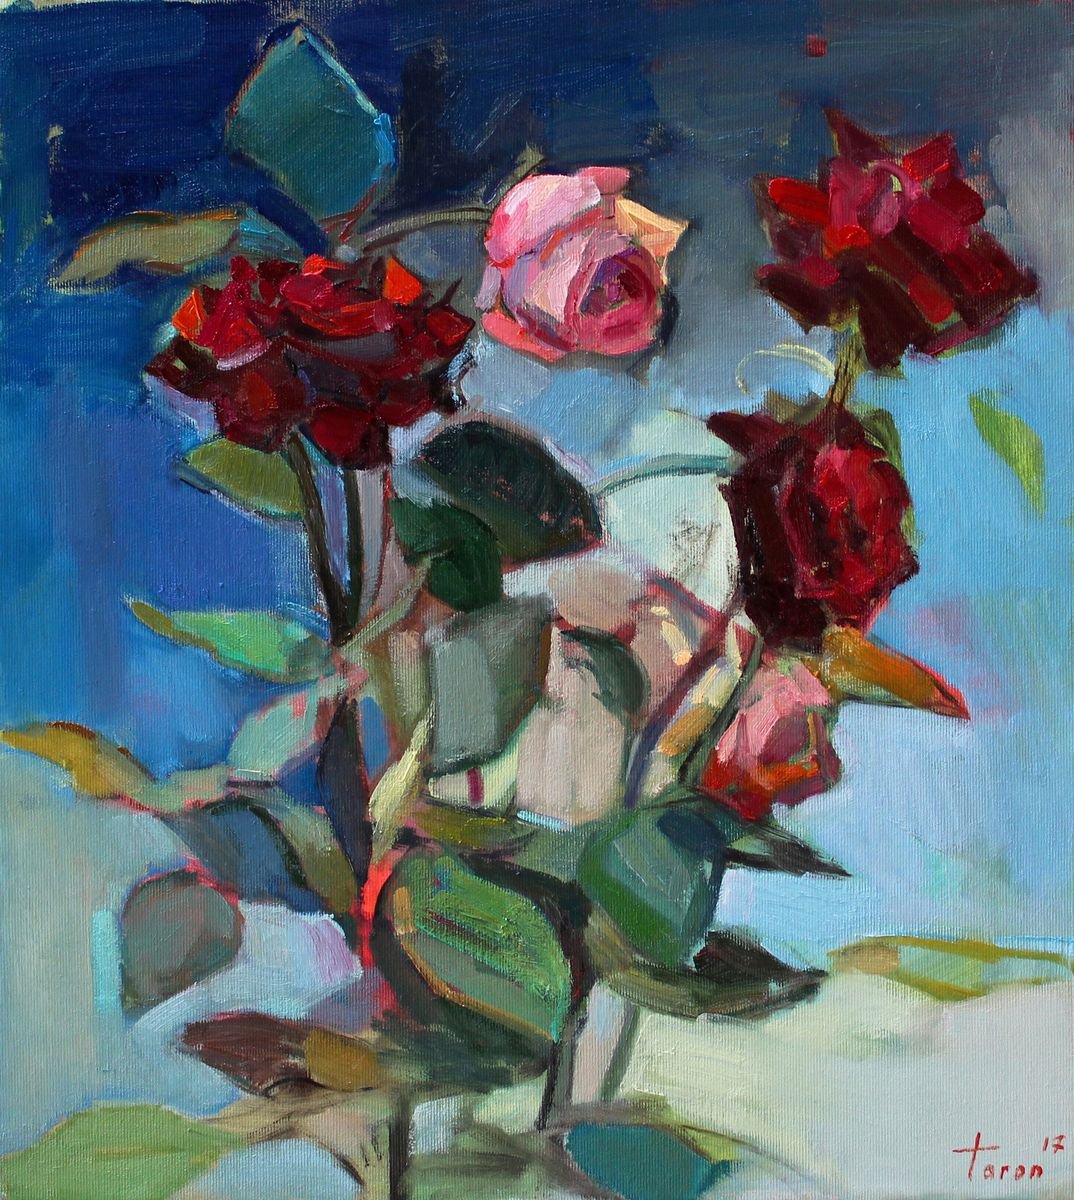 Bouquet of roses by Taron Khachatryan